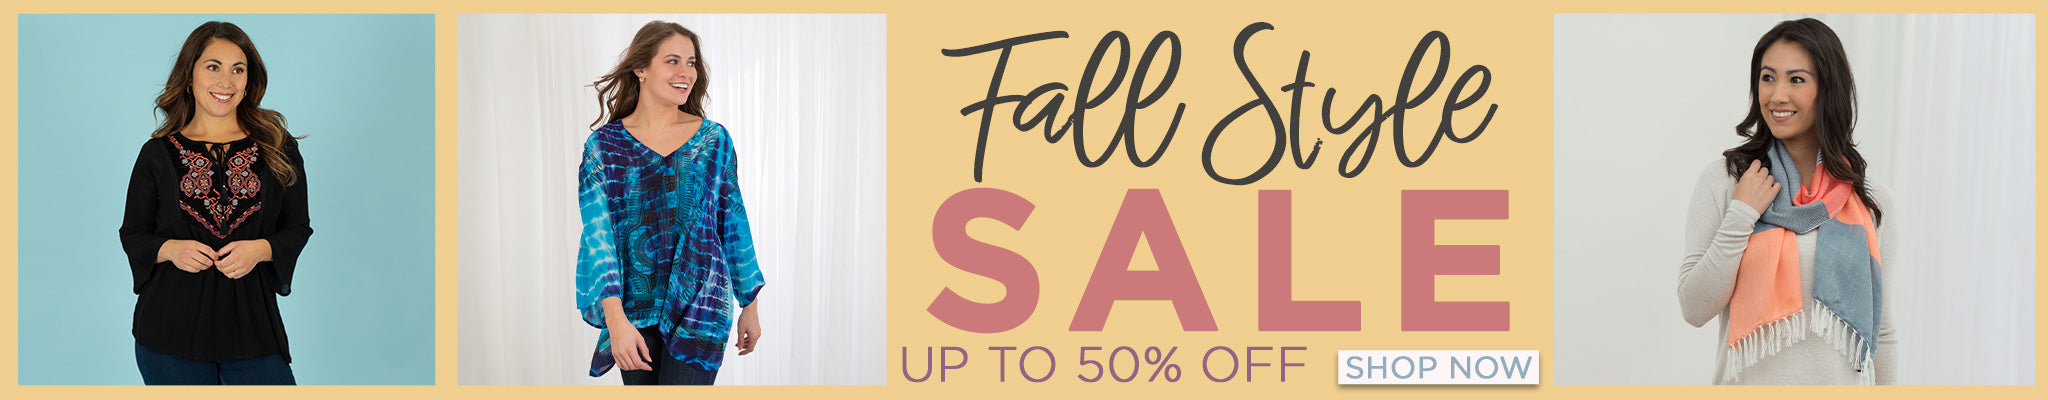 Fall Style Sale